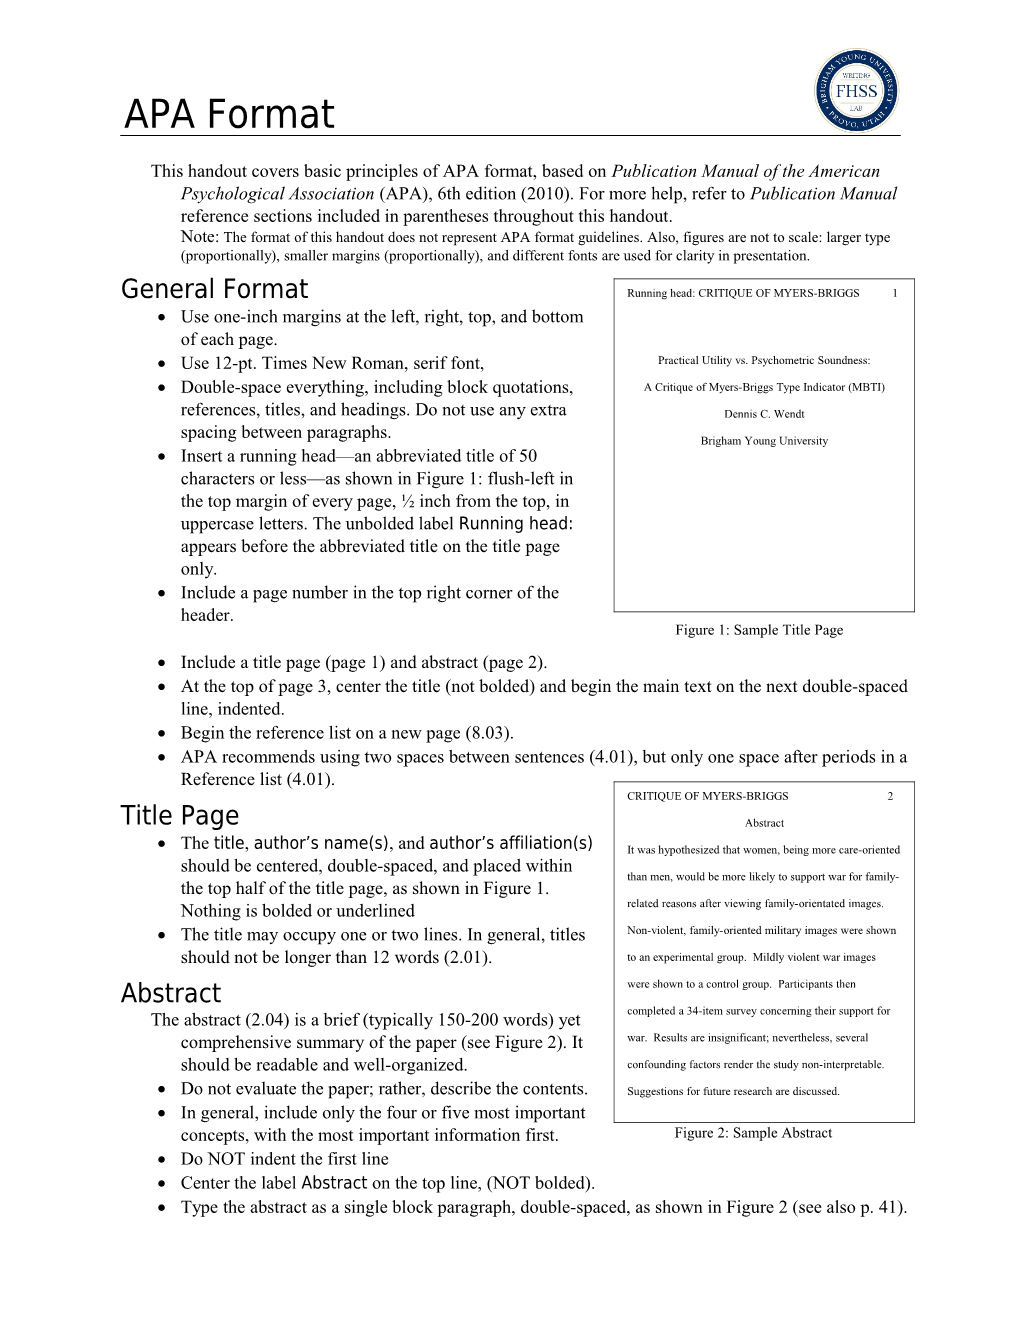 This Handout Covers Basic Principles of APA Format, Based on Publication Manual of The